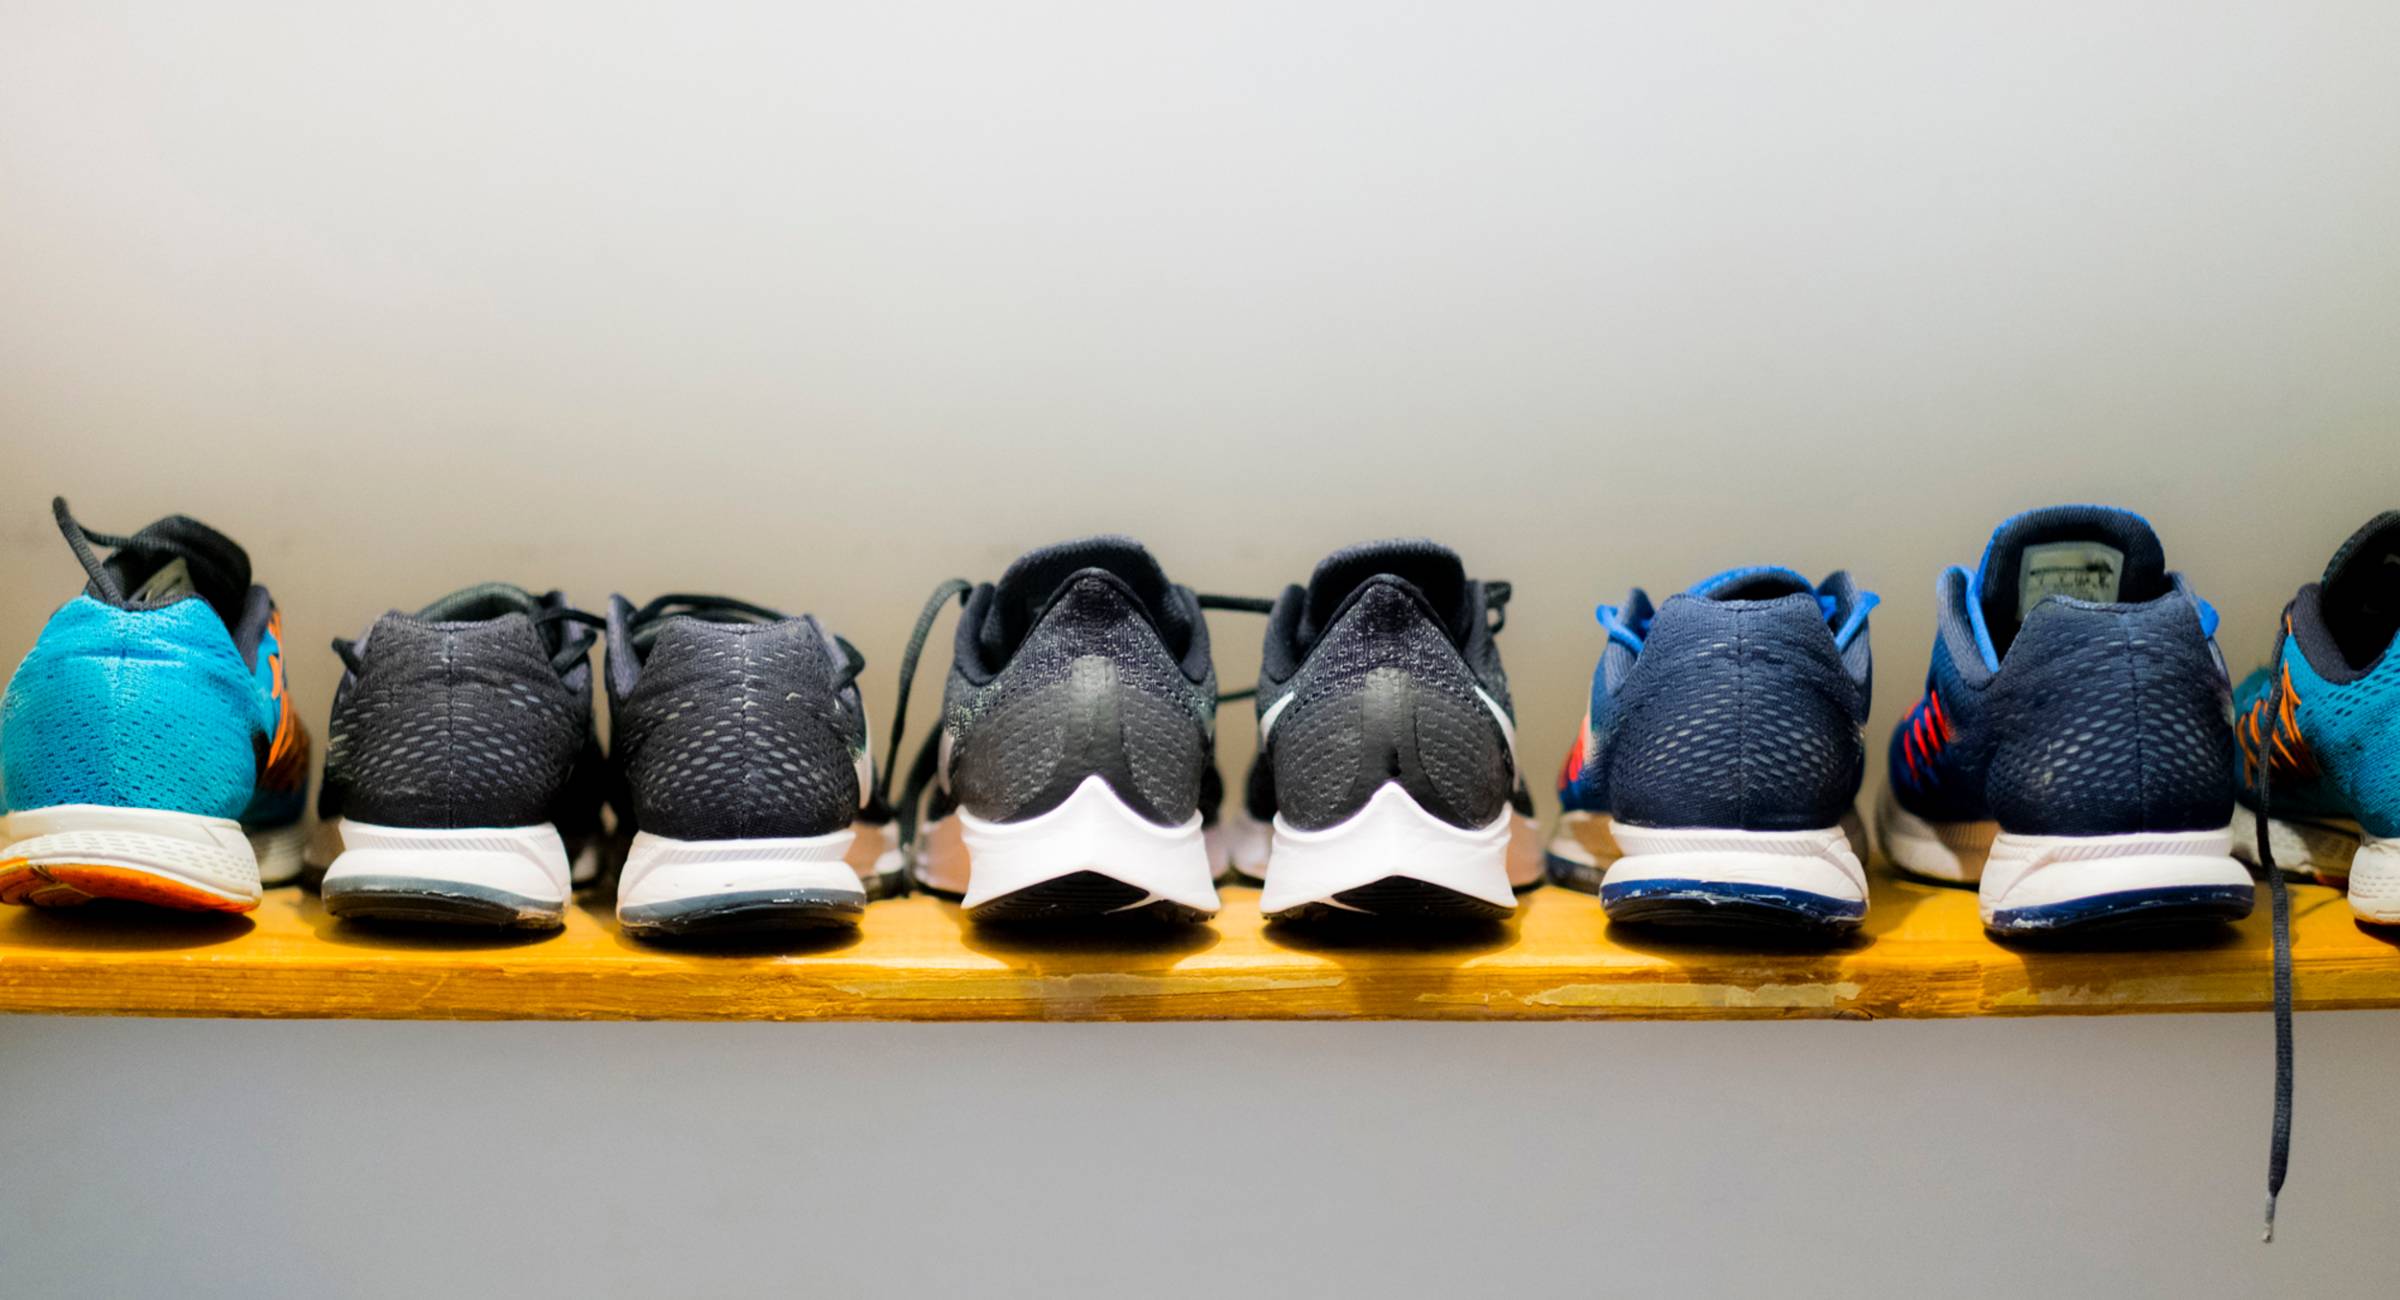 Sneakers neatly lined up against a white wall.